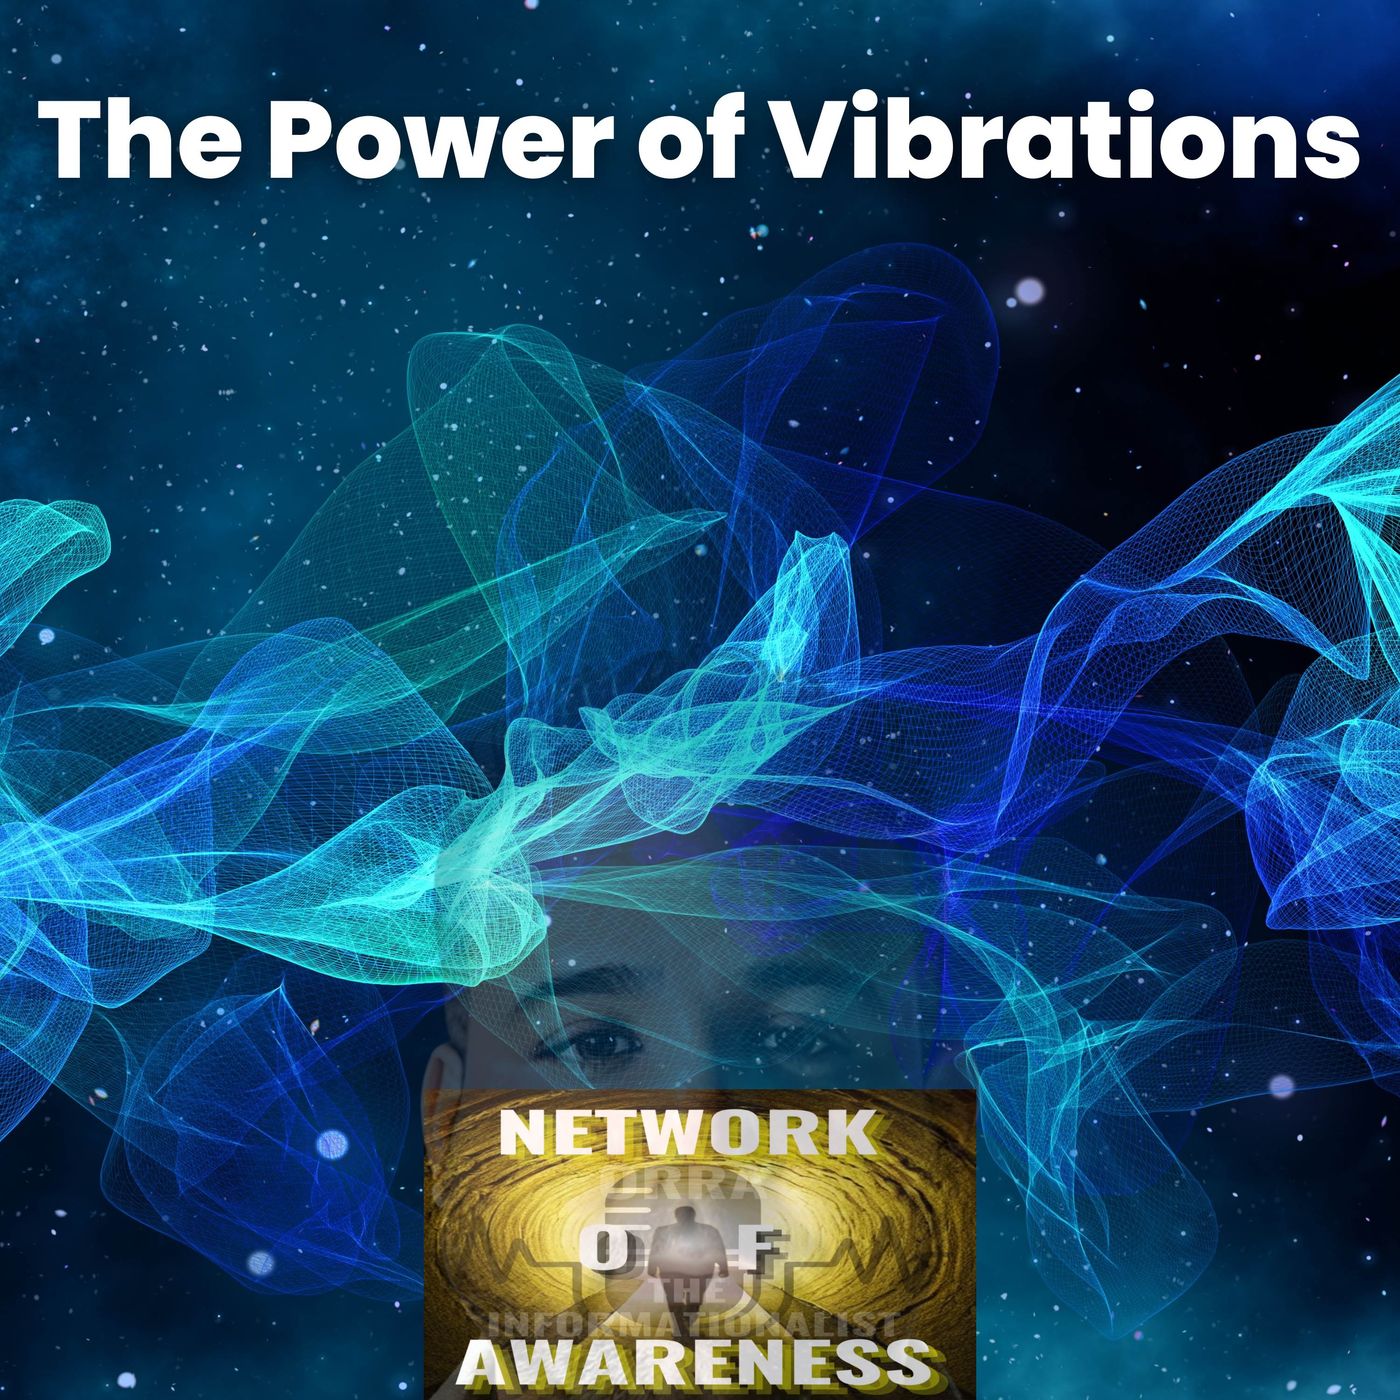 The Power of Vibrations